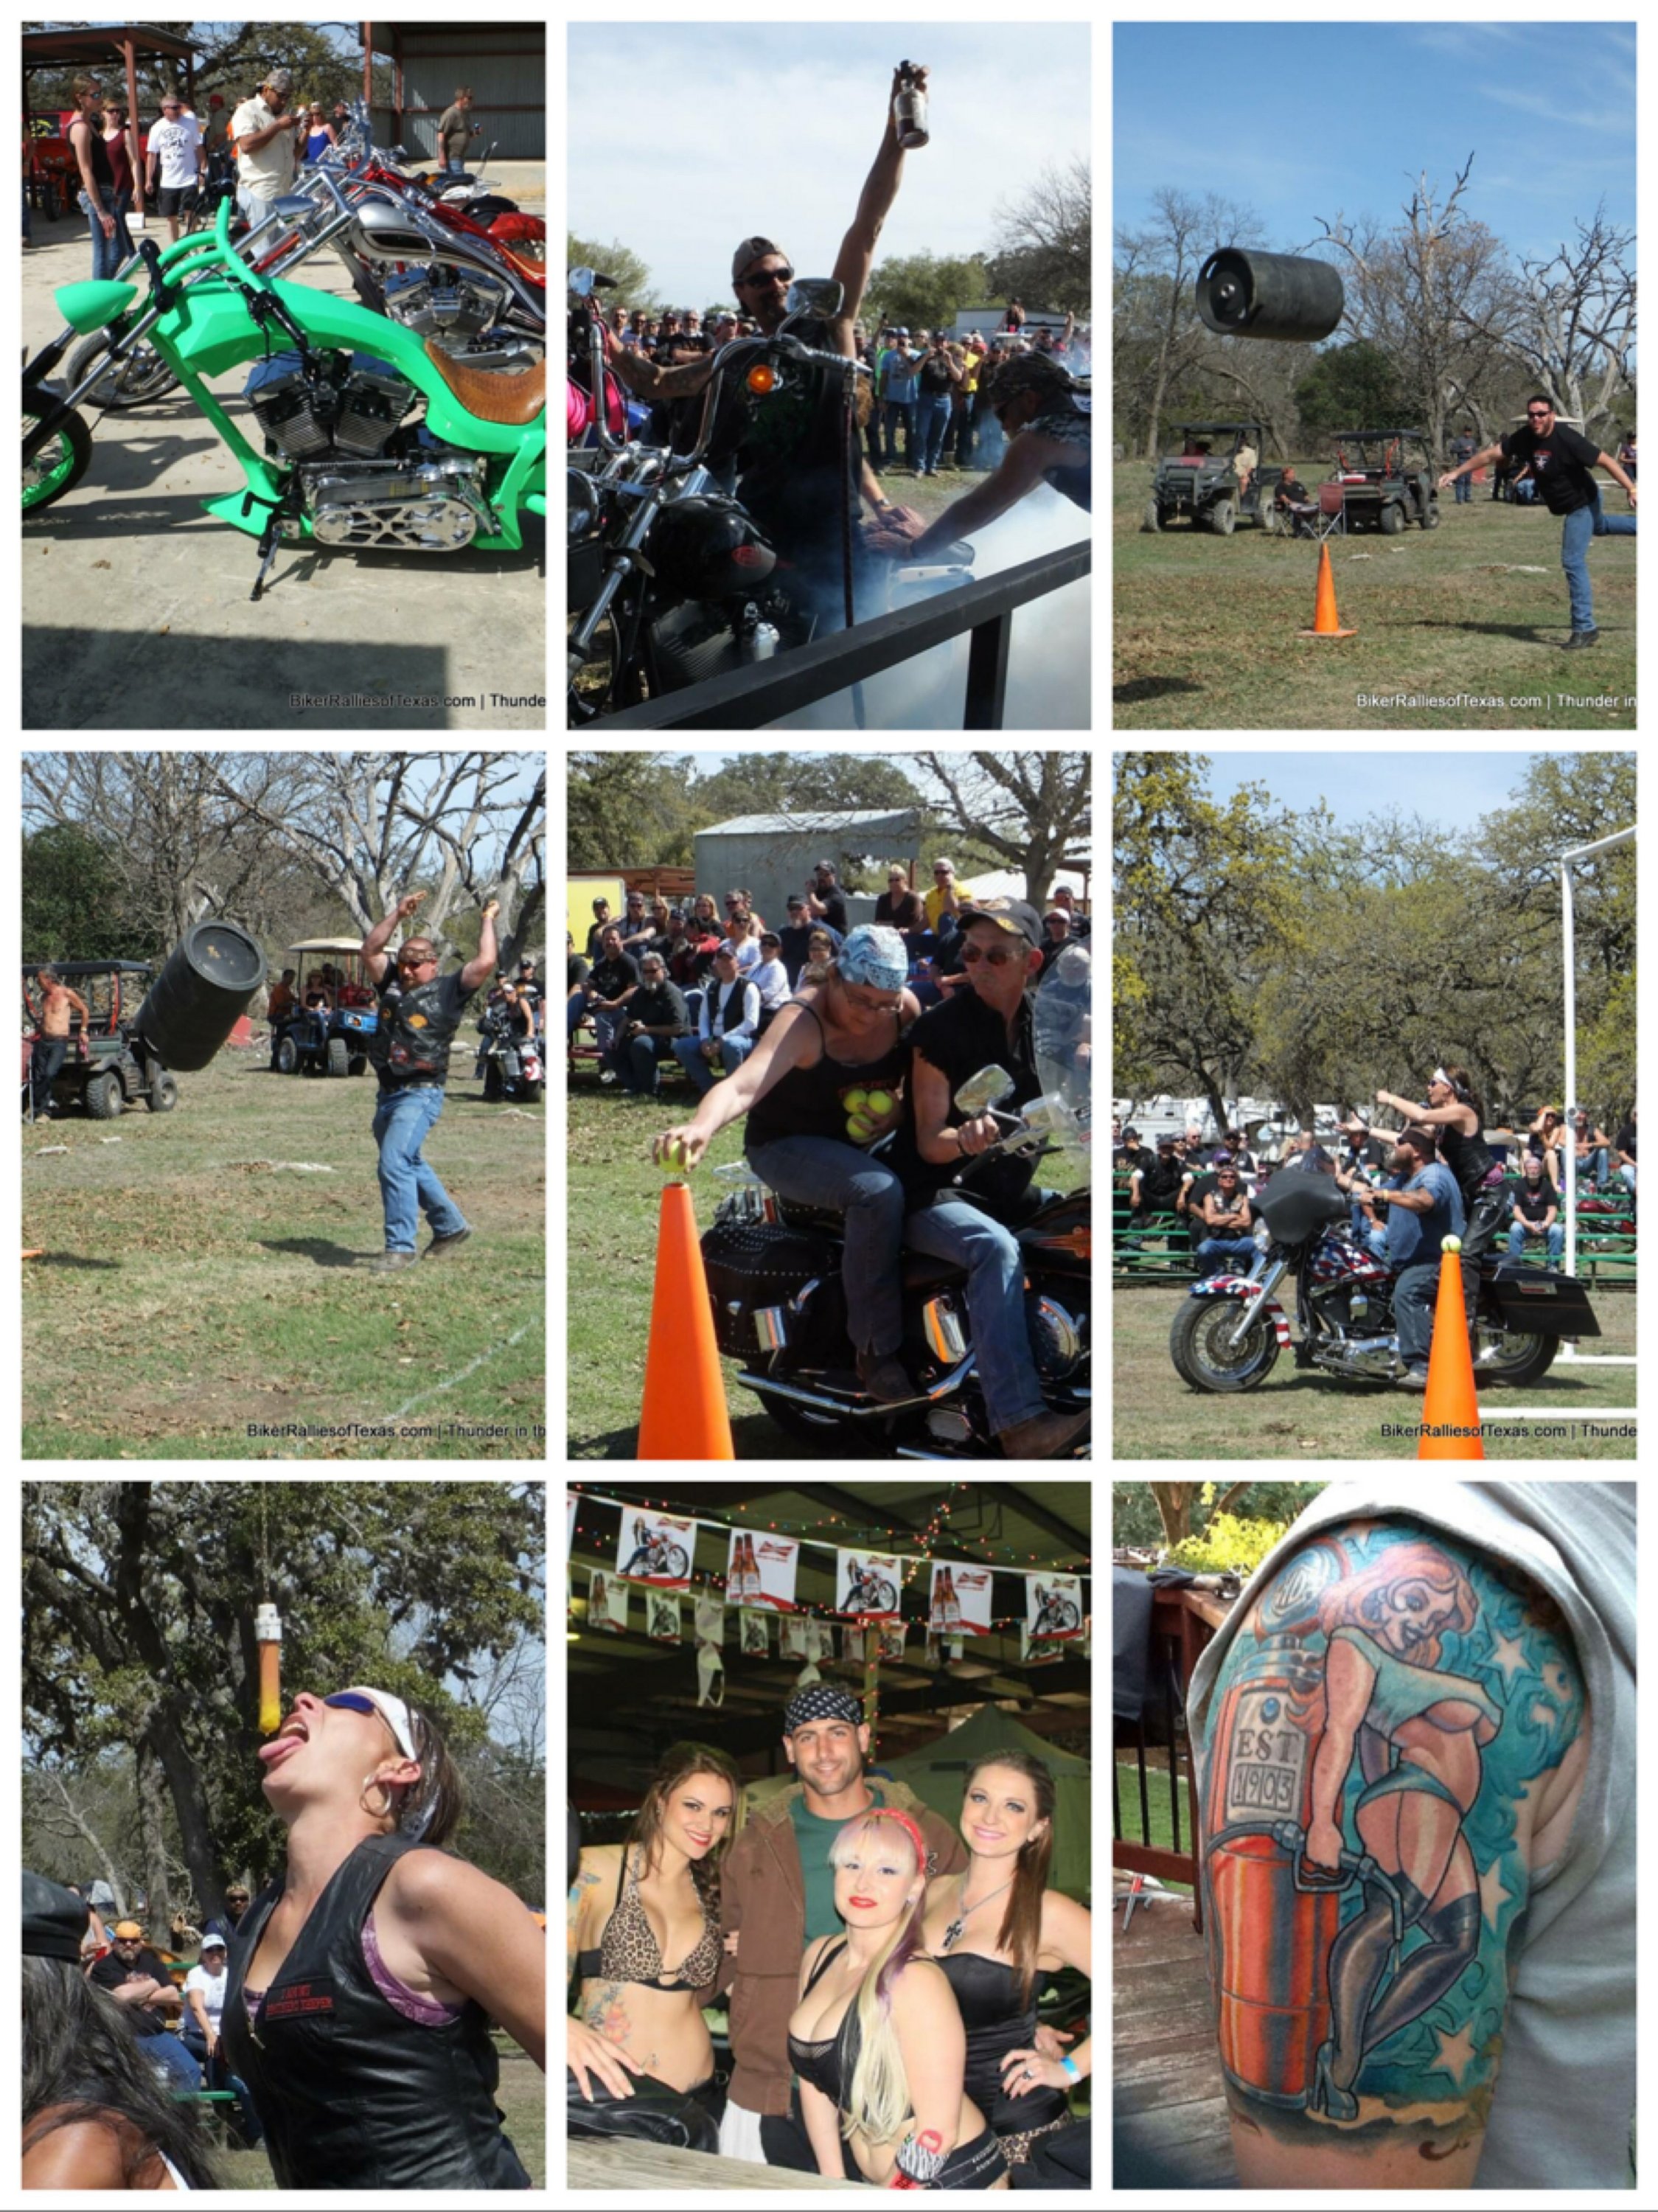 Texas Hill Country Bike Week, Thunder in the Hill Country 2020 Rally is